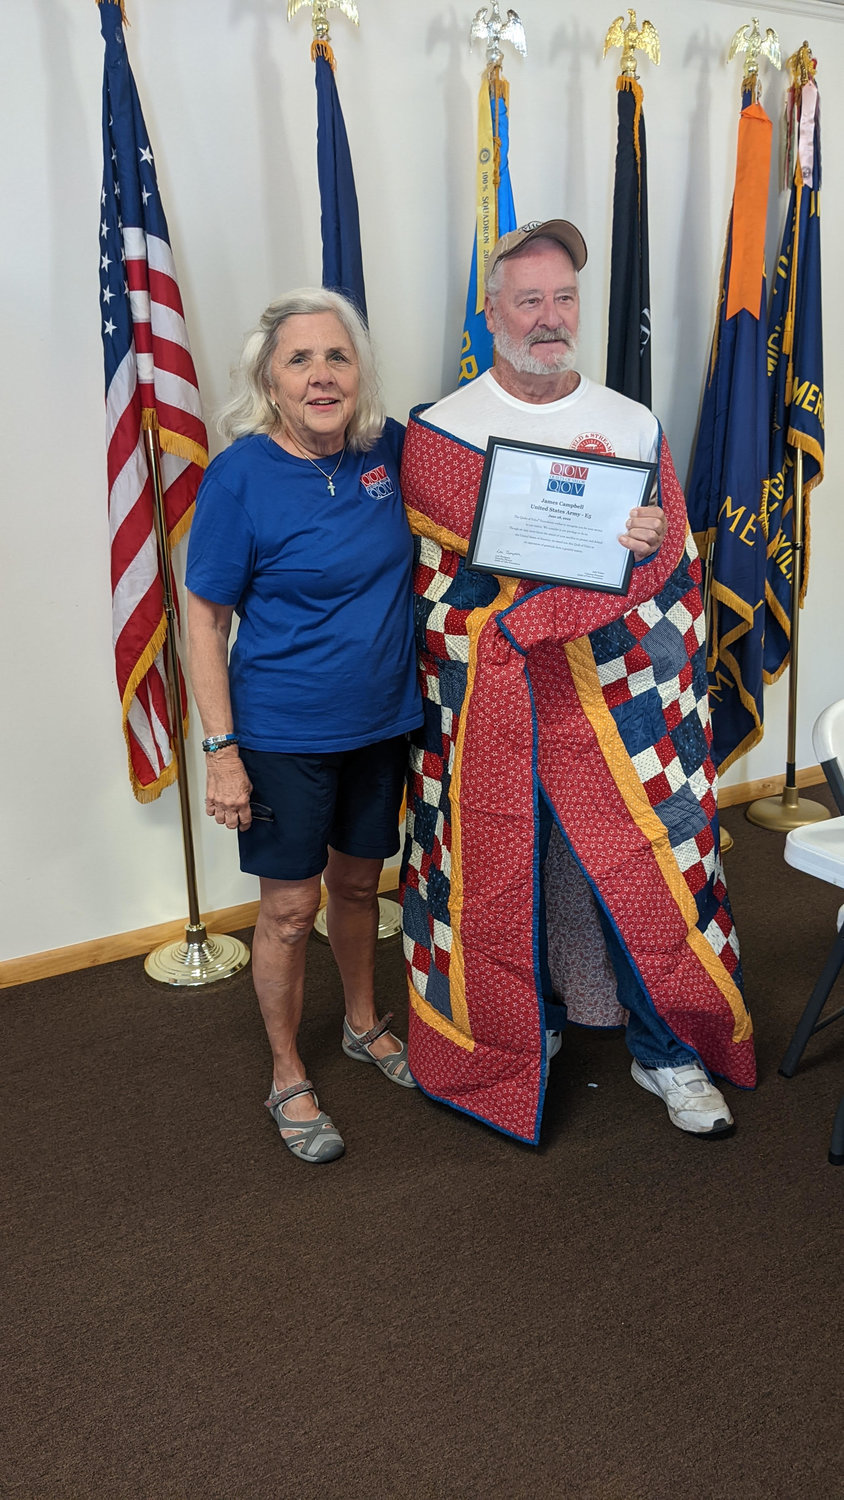 James Campbell of Harrison was awarded a Quilt of Valor by Quilts of Valor Foundation representative Judy Tritten